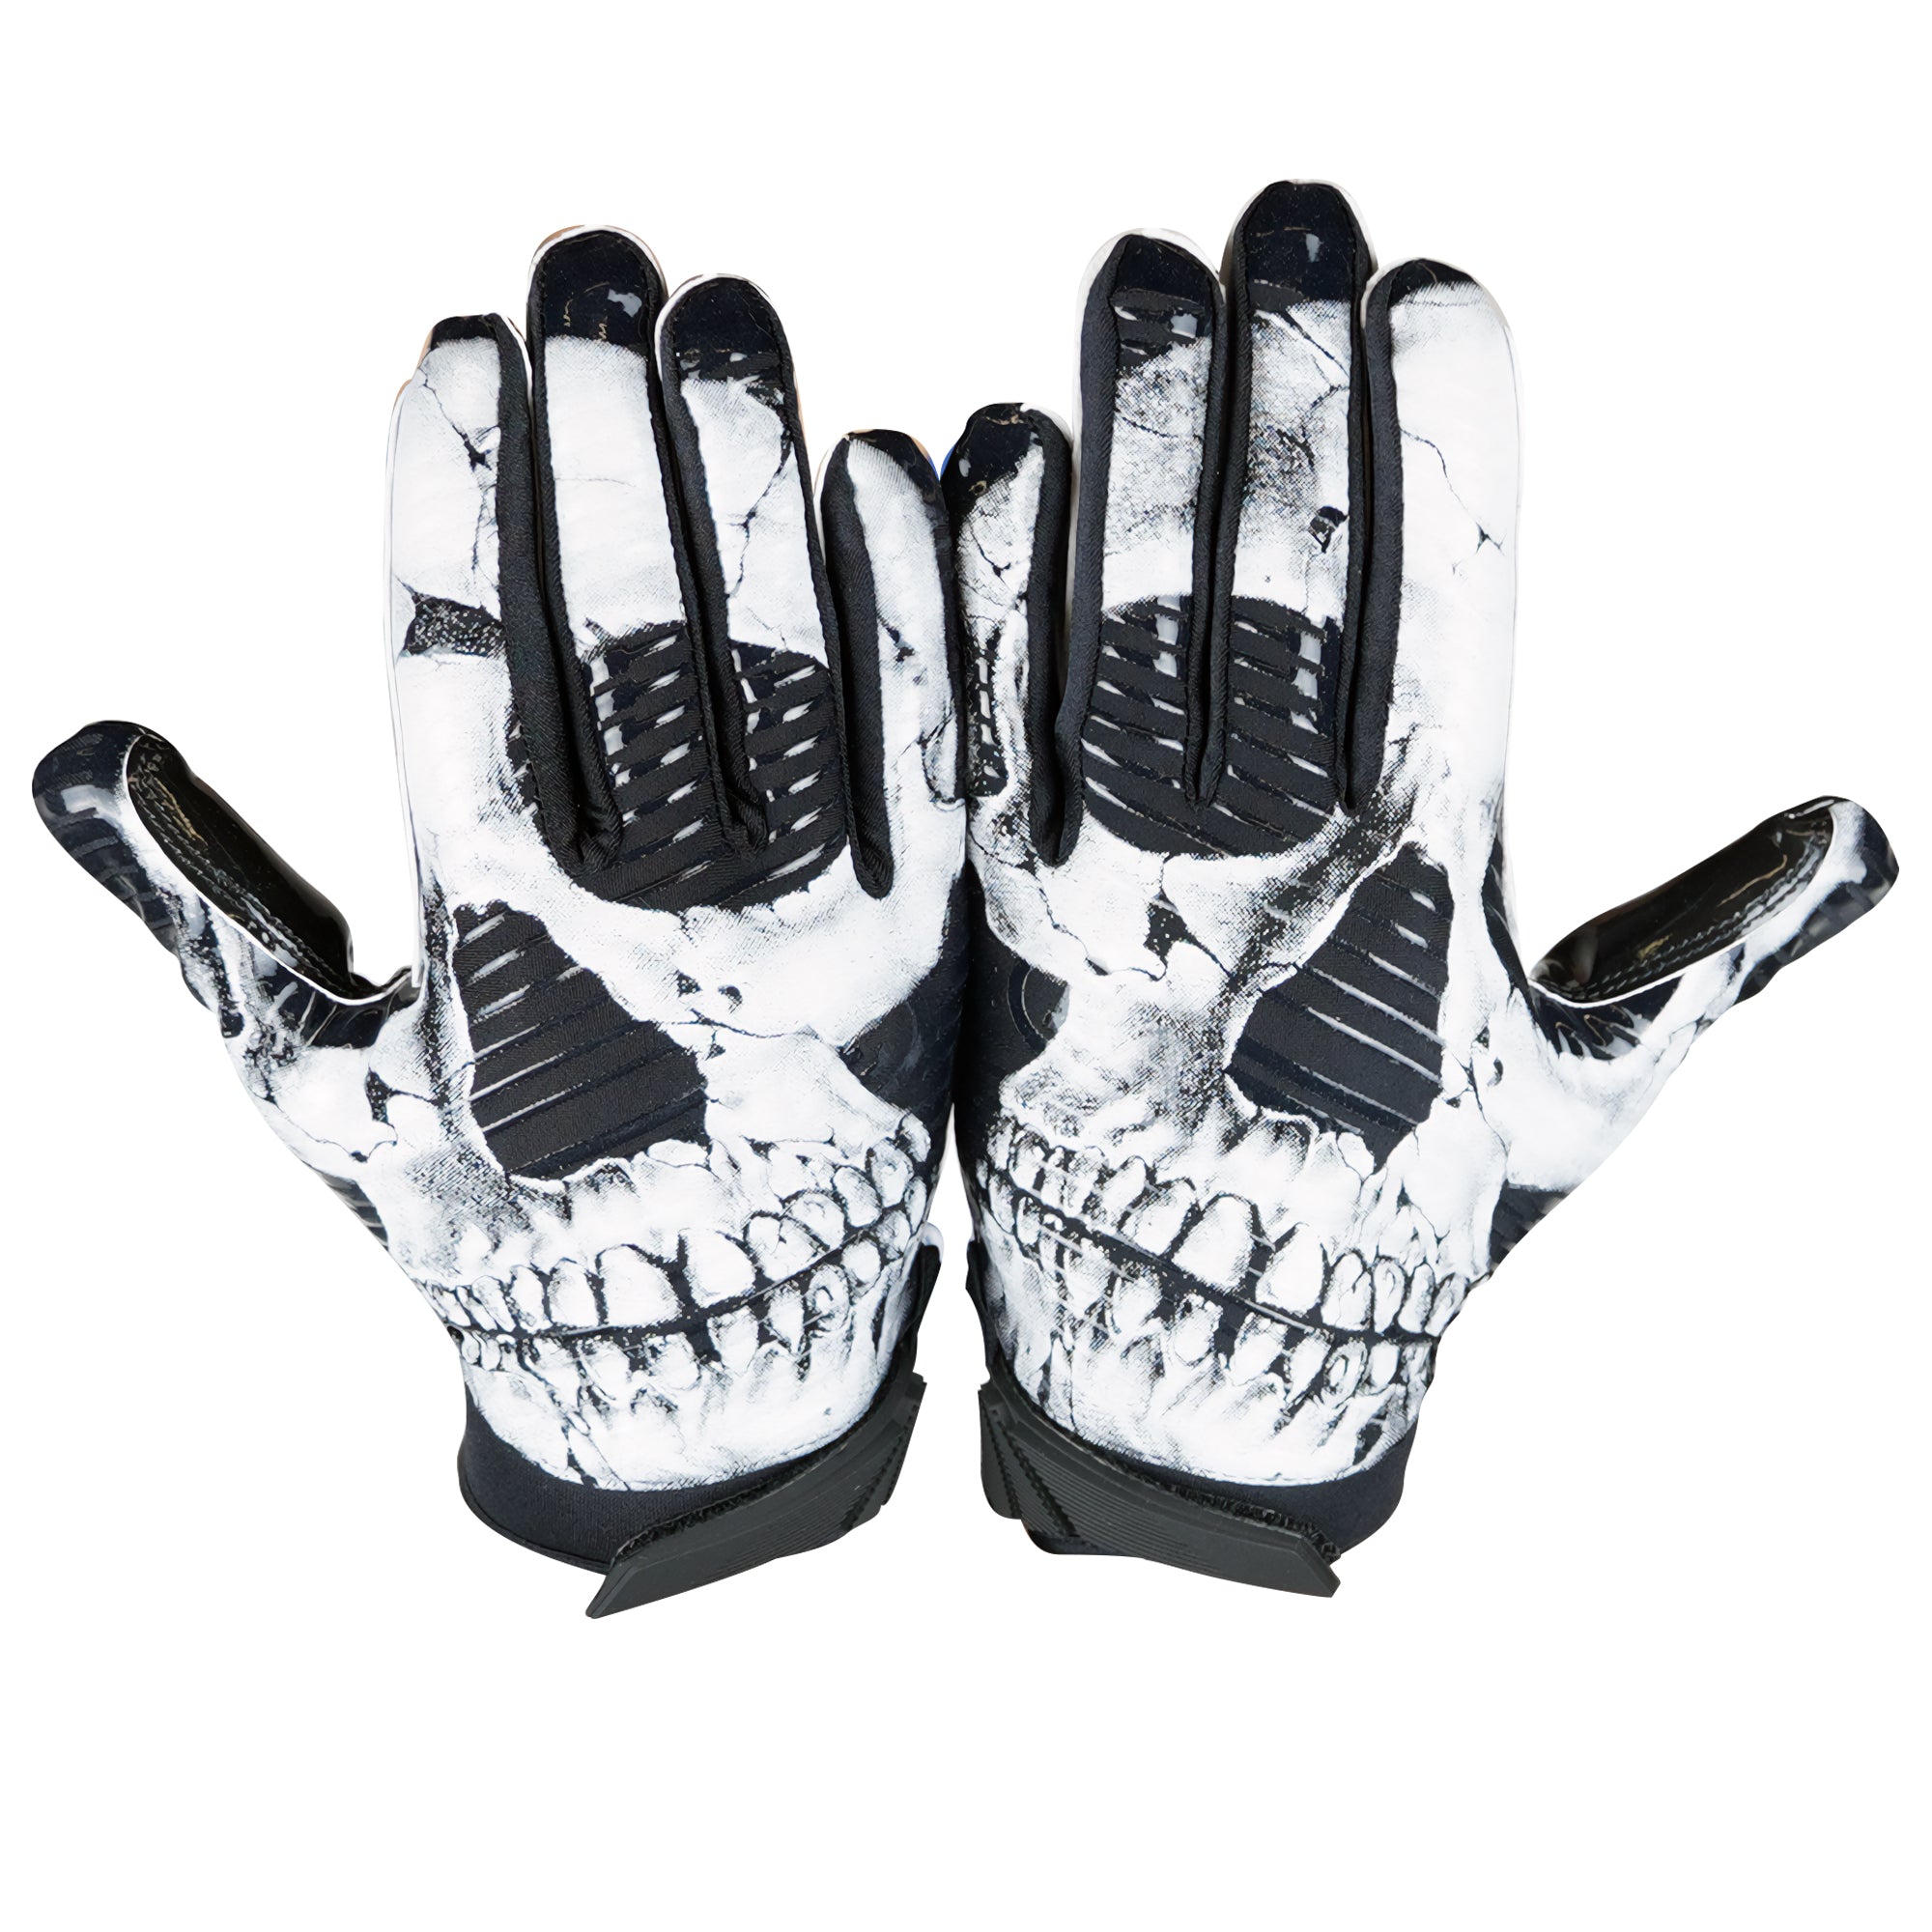 Battle Sports Skull Face Cloaked Adult Football Receiver Gloves - Black/White Battle Sports